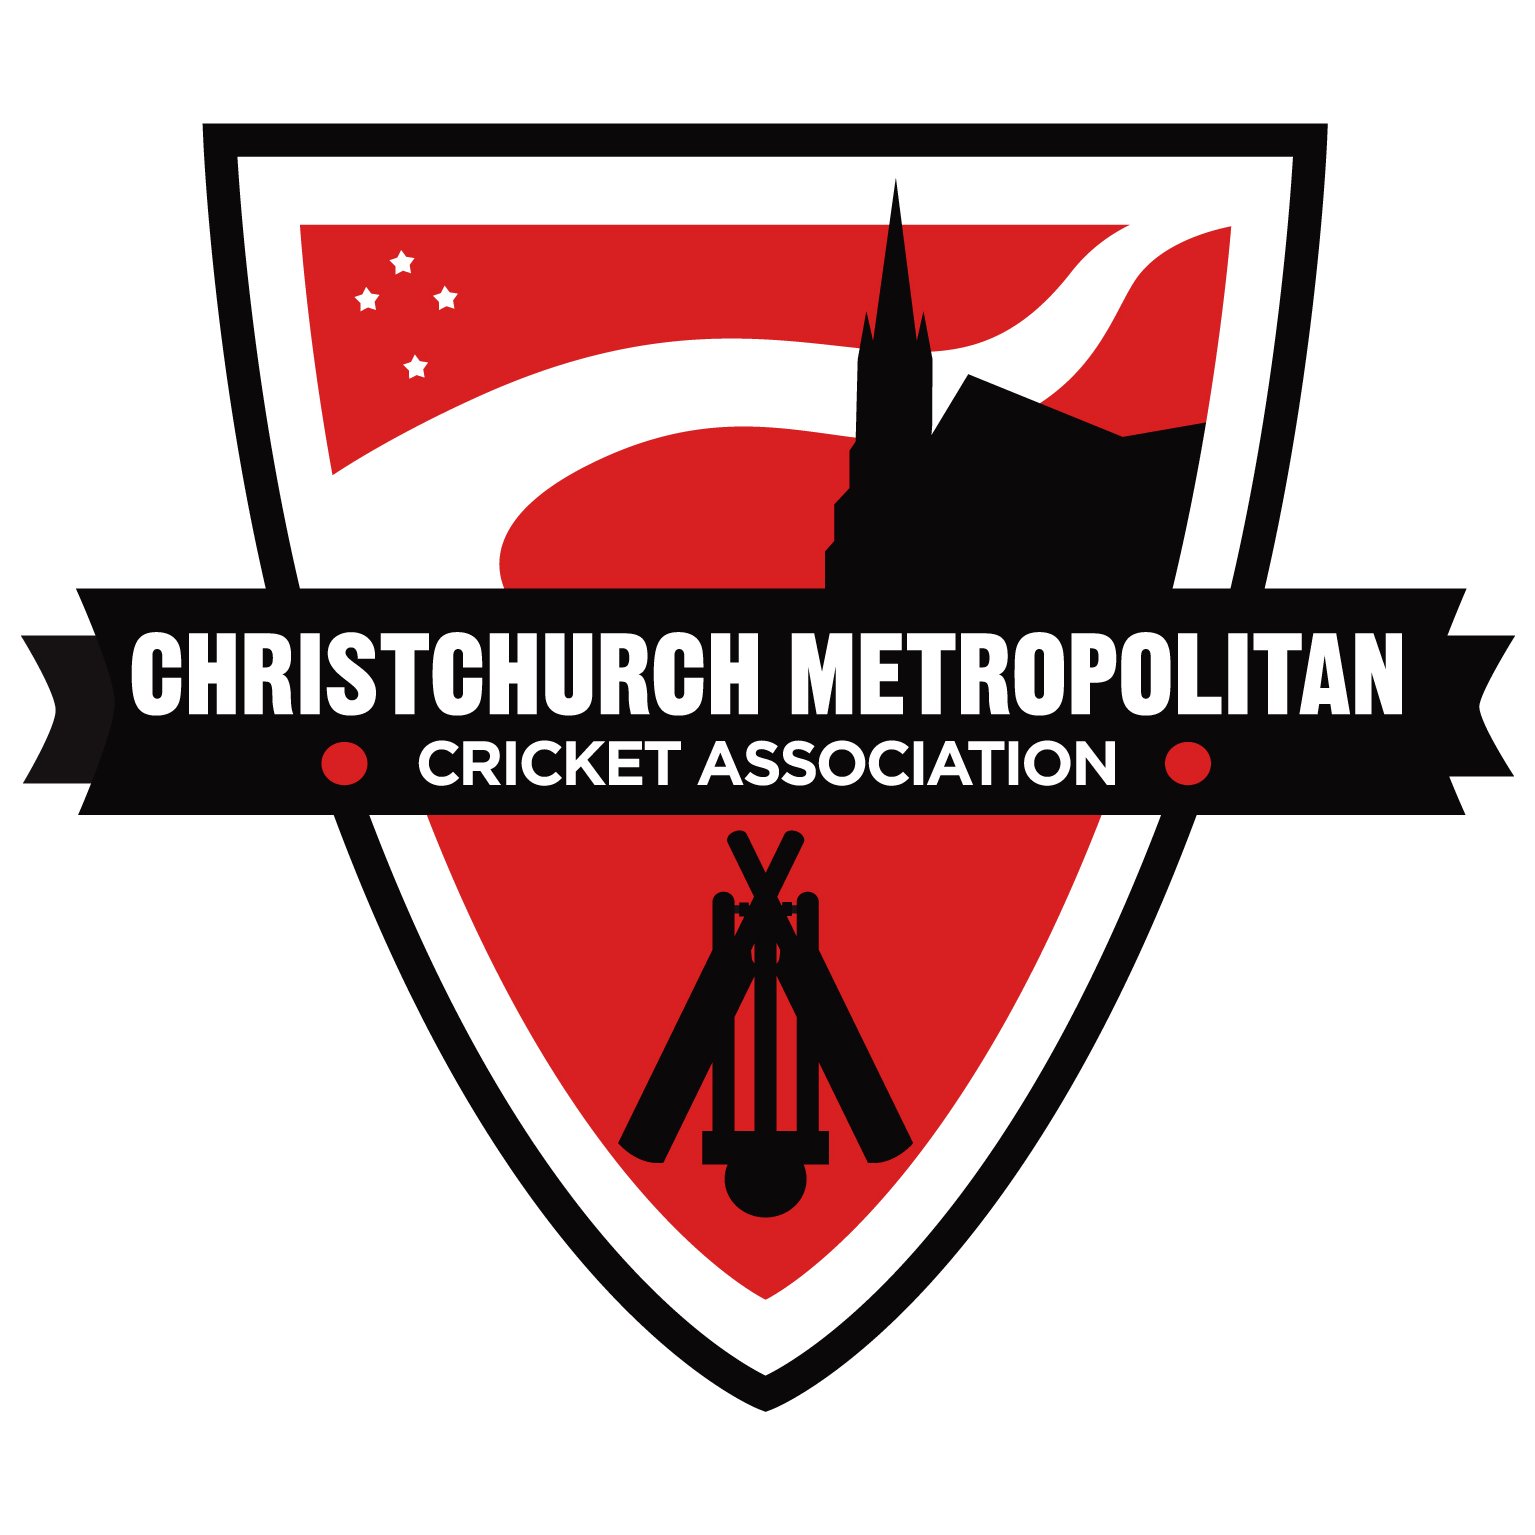 Christchurch Metro Cricket is charged with leadership, management and organisation of community cricket in Christchurch https://t.co/HLMylCwpik